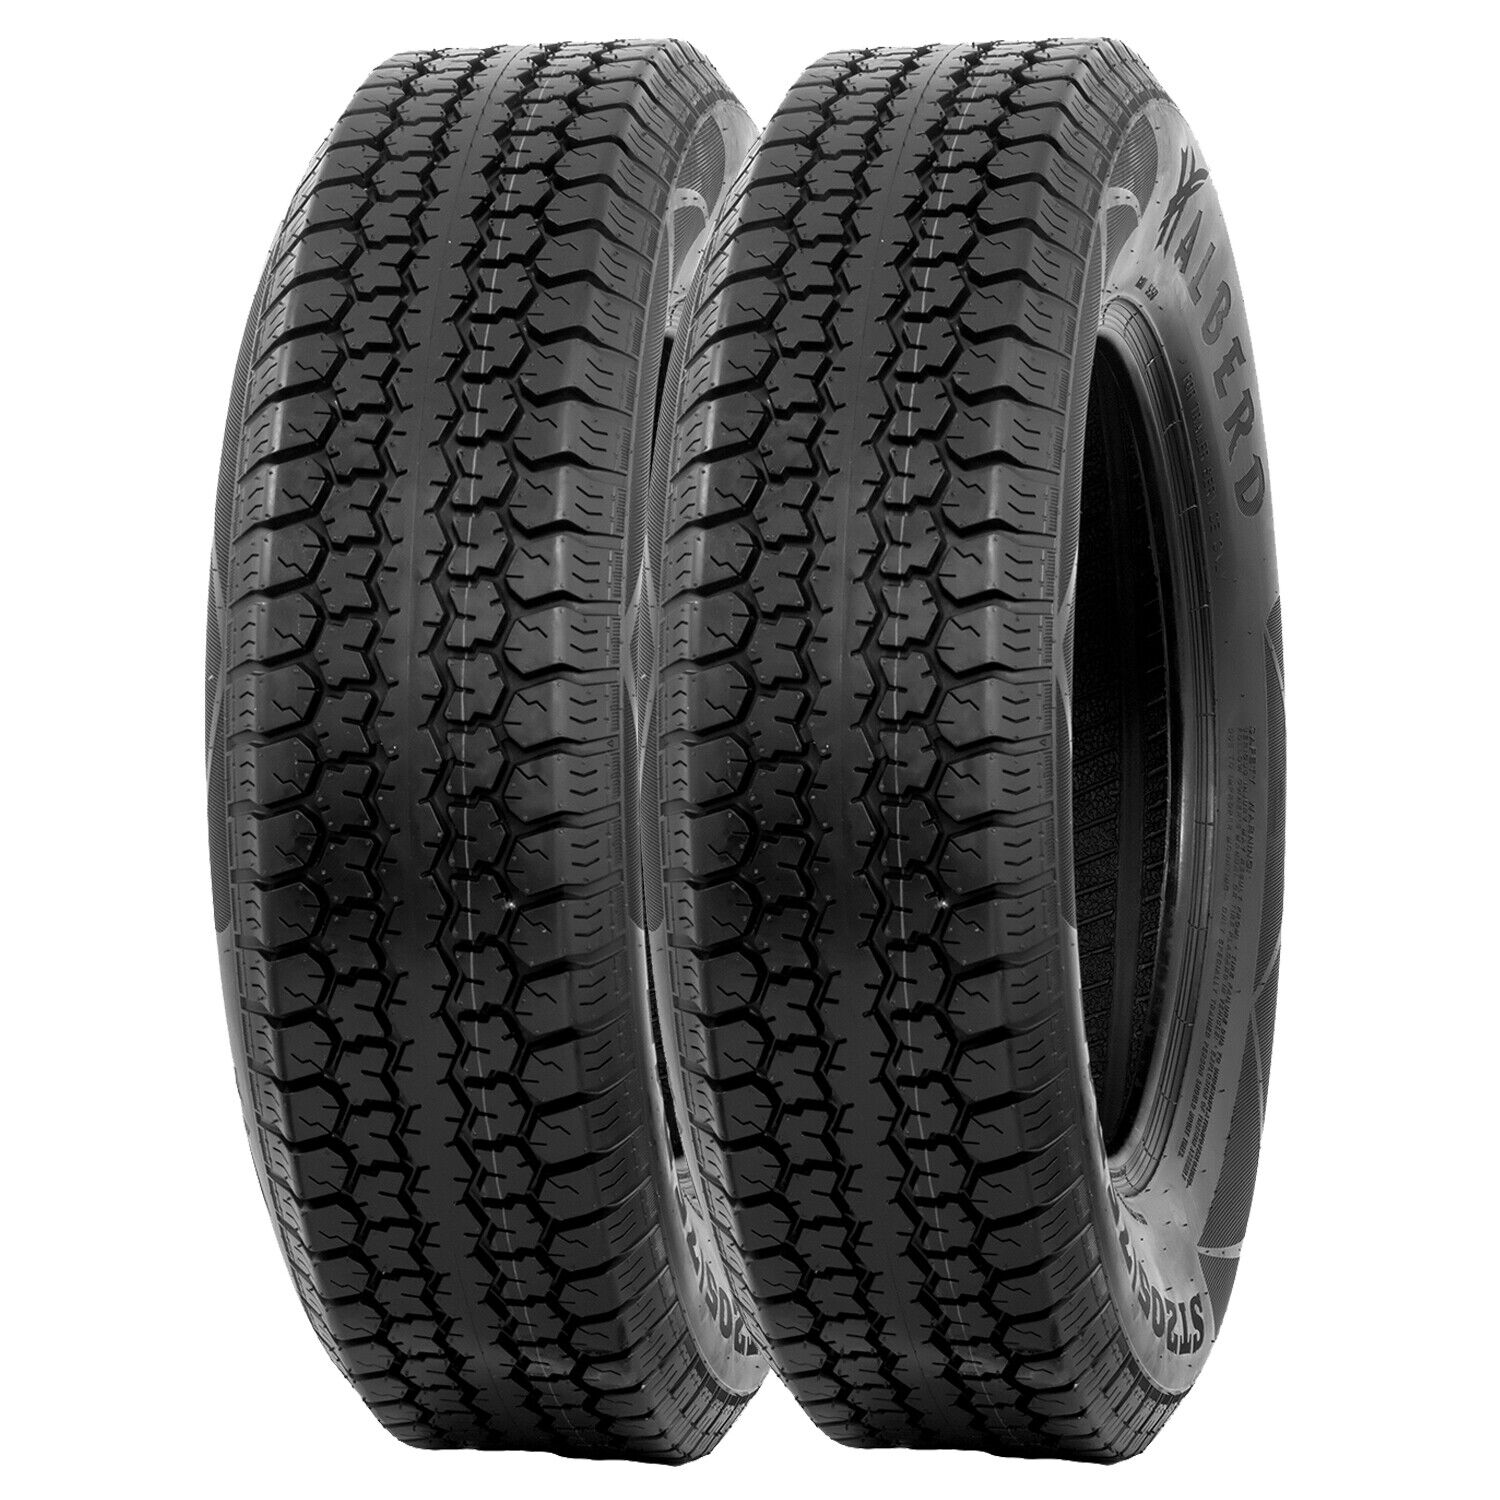 Set Of 2 ST205/75D15 Bias Trailer Tires 6Ply 205/75-15 Eco-Friendly Replacement